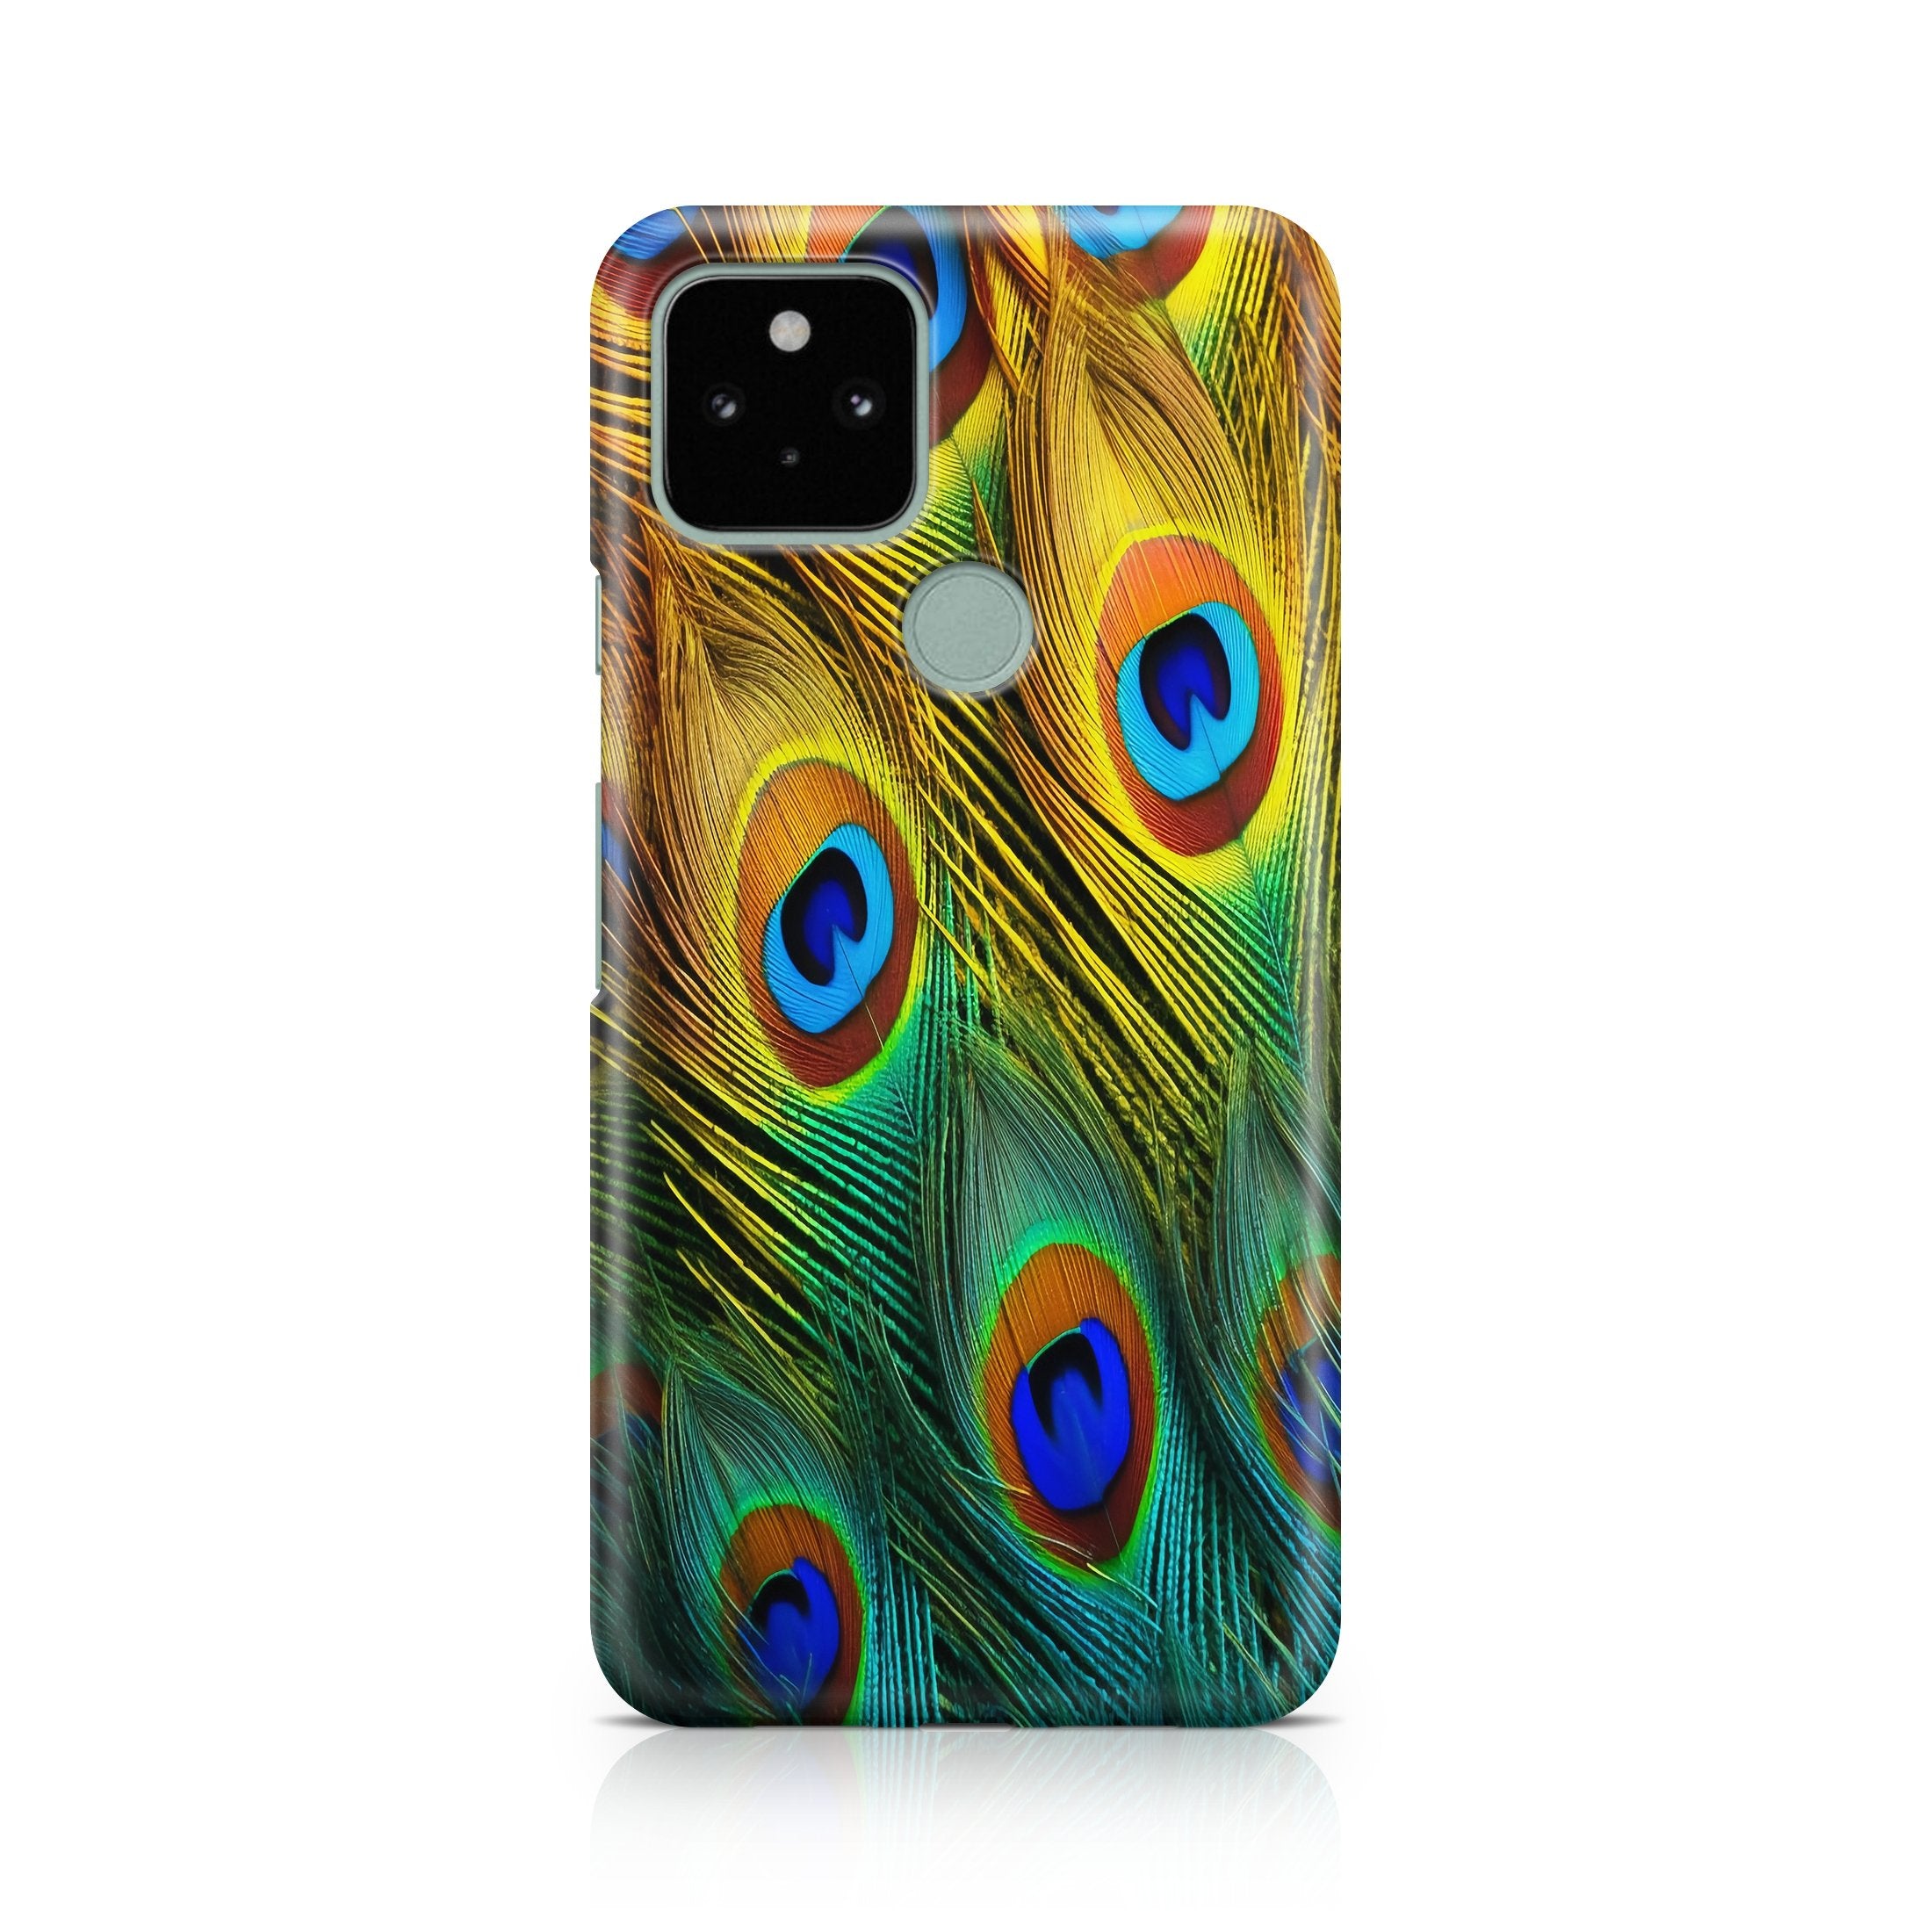 Spirit Feathers - Google phone case designs by CaseSwagger